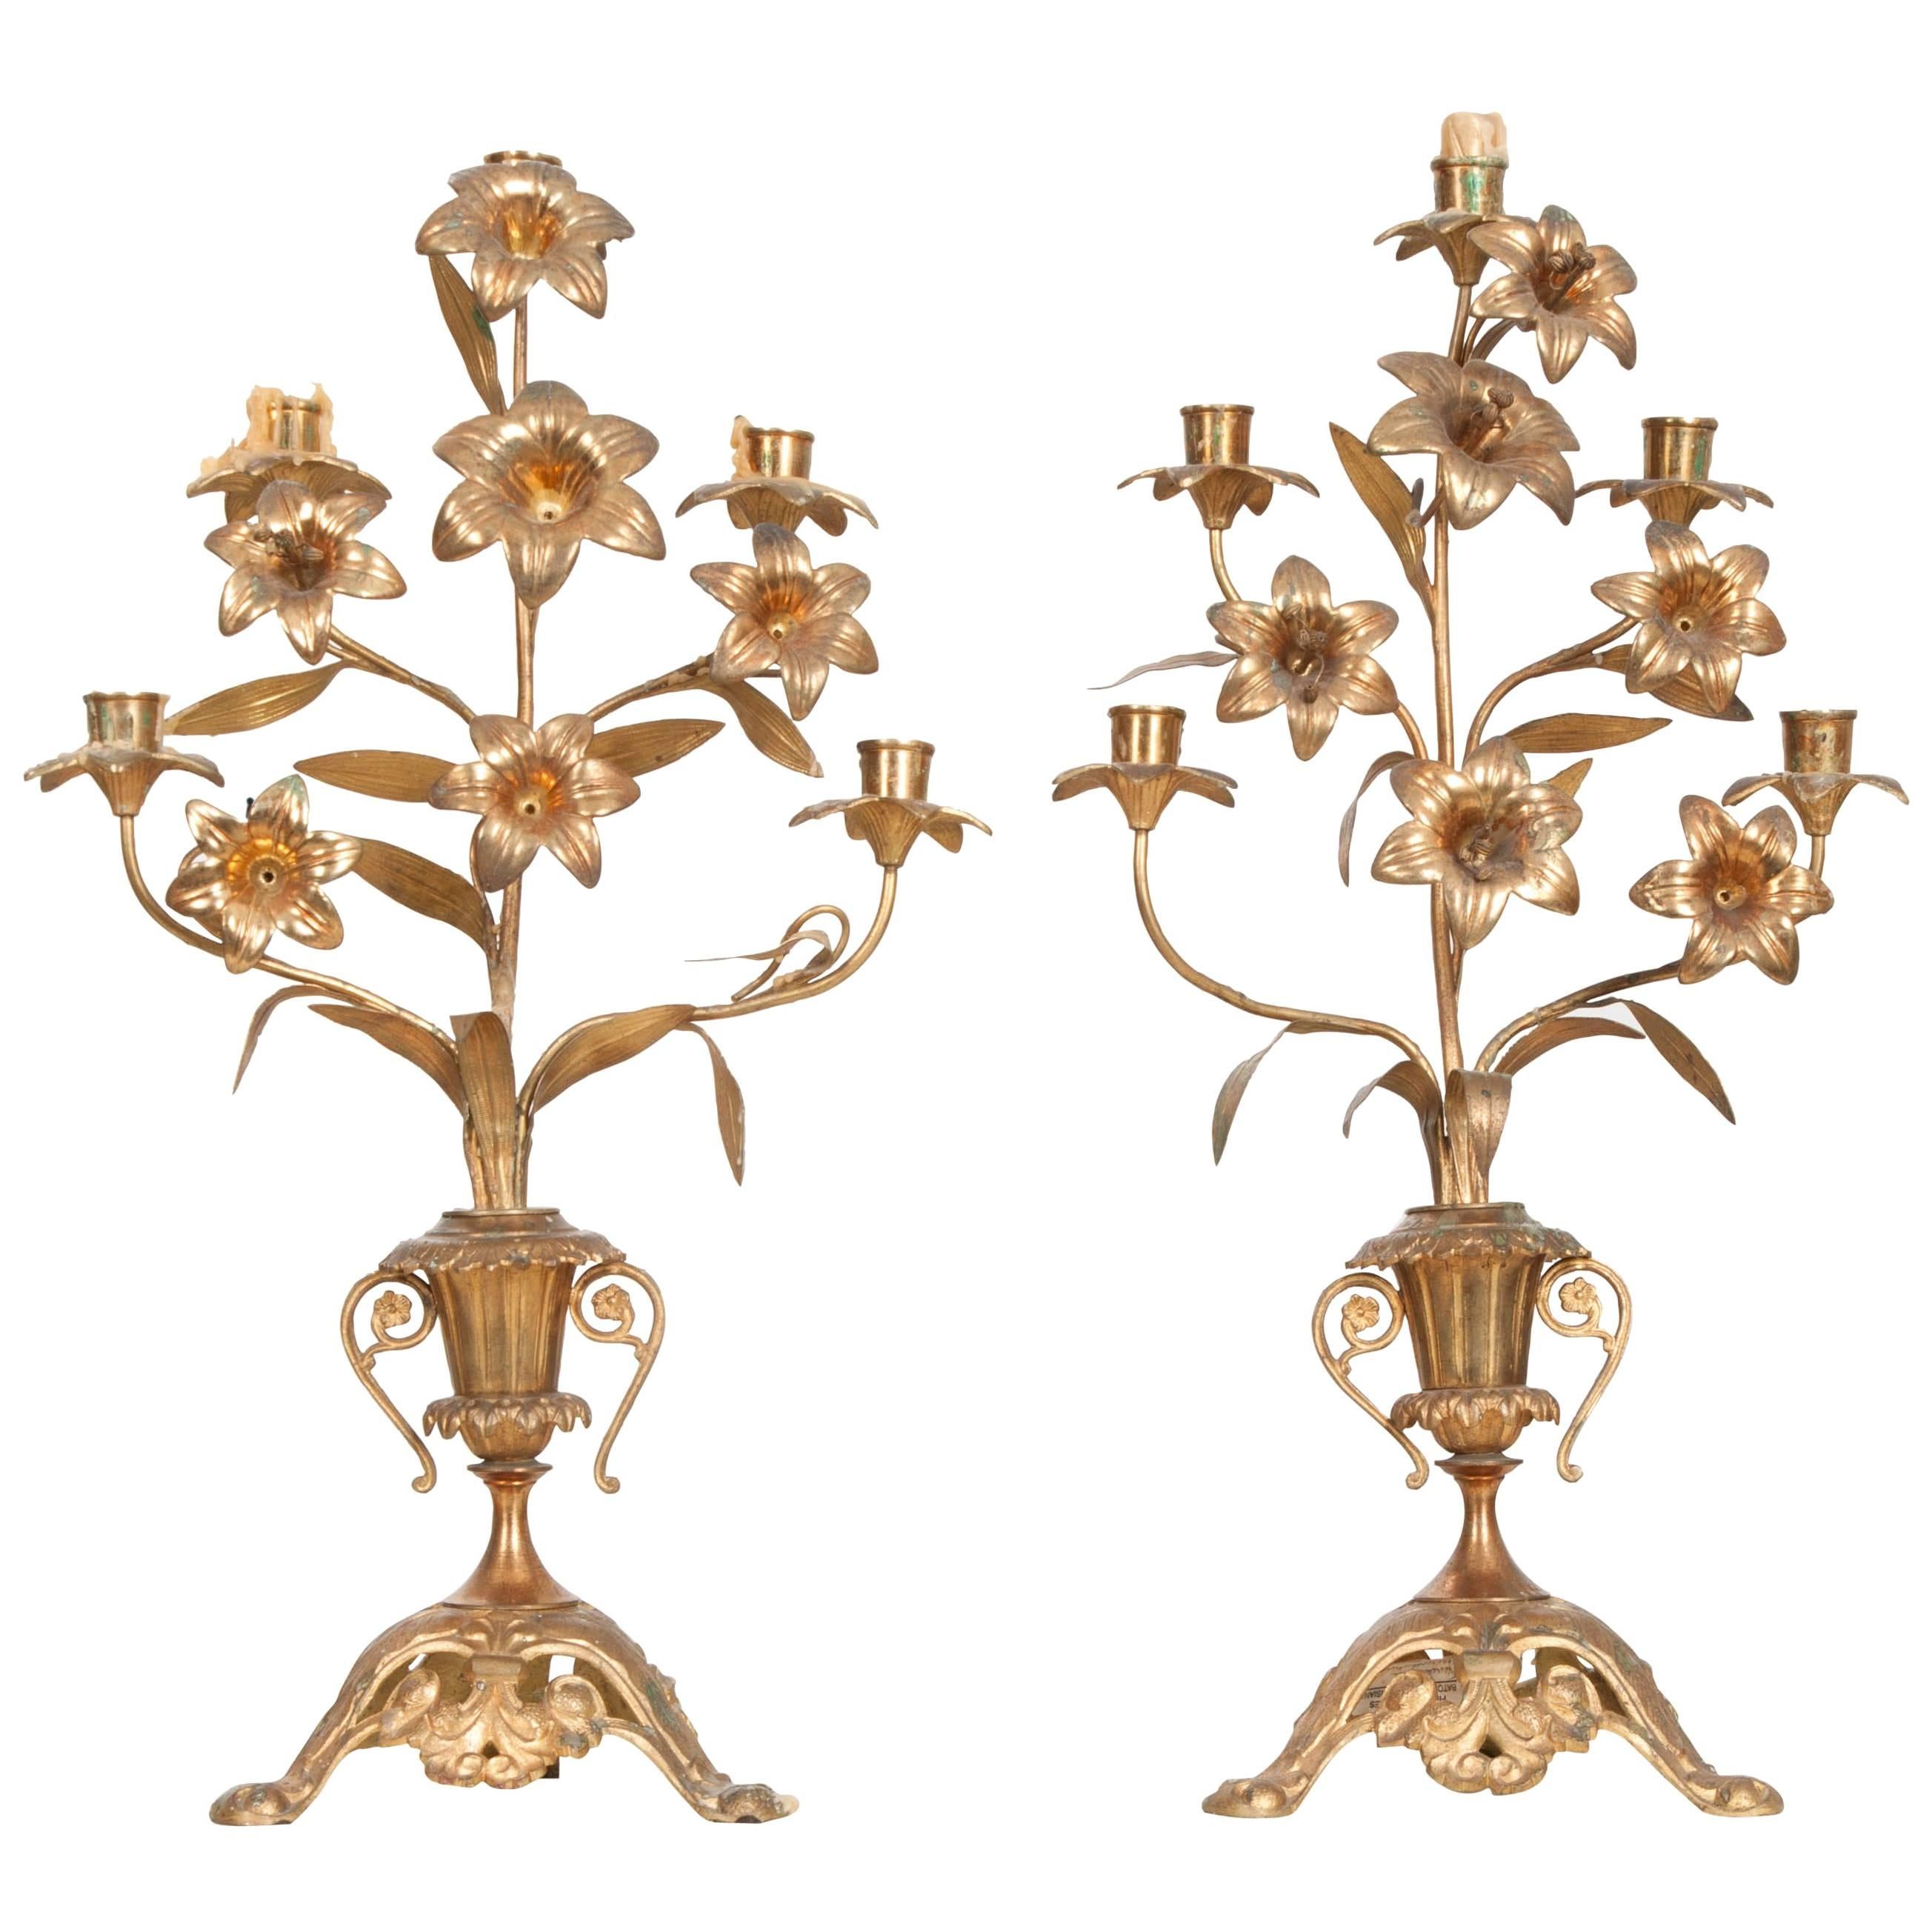 Pair of French 19th Century Brass Altar Candelabras